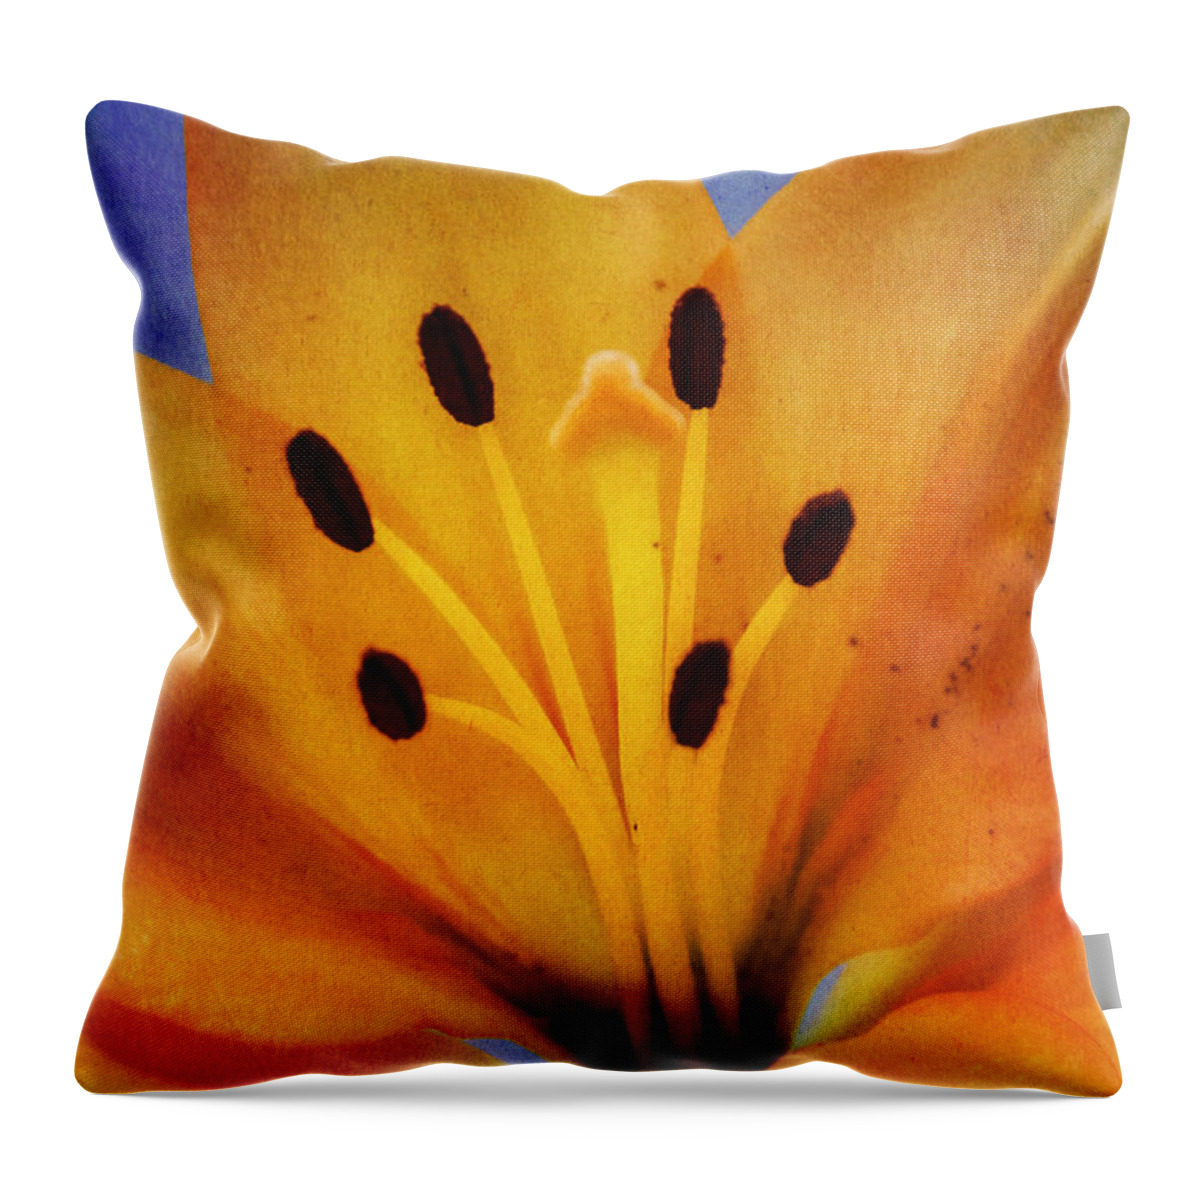 Flower Throw Pillow featuring the photograph The Center by Cathy Kovarik